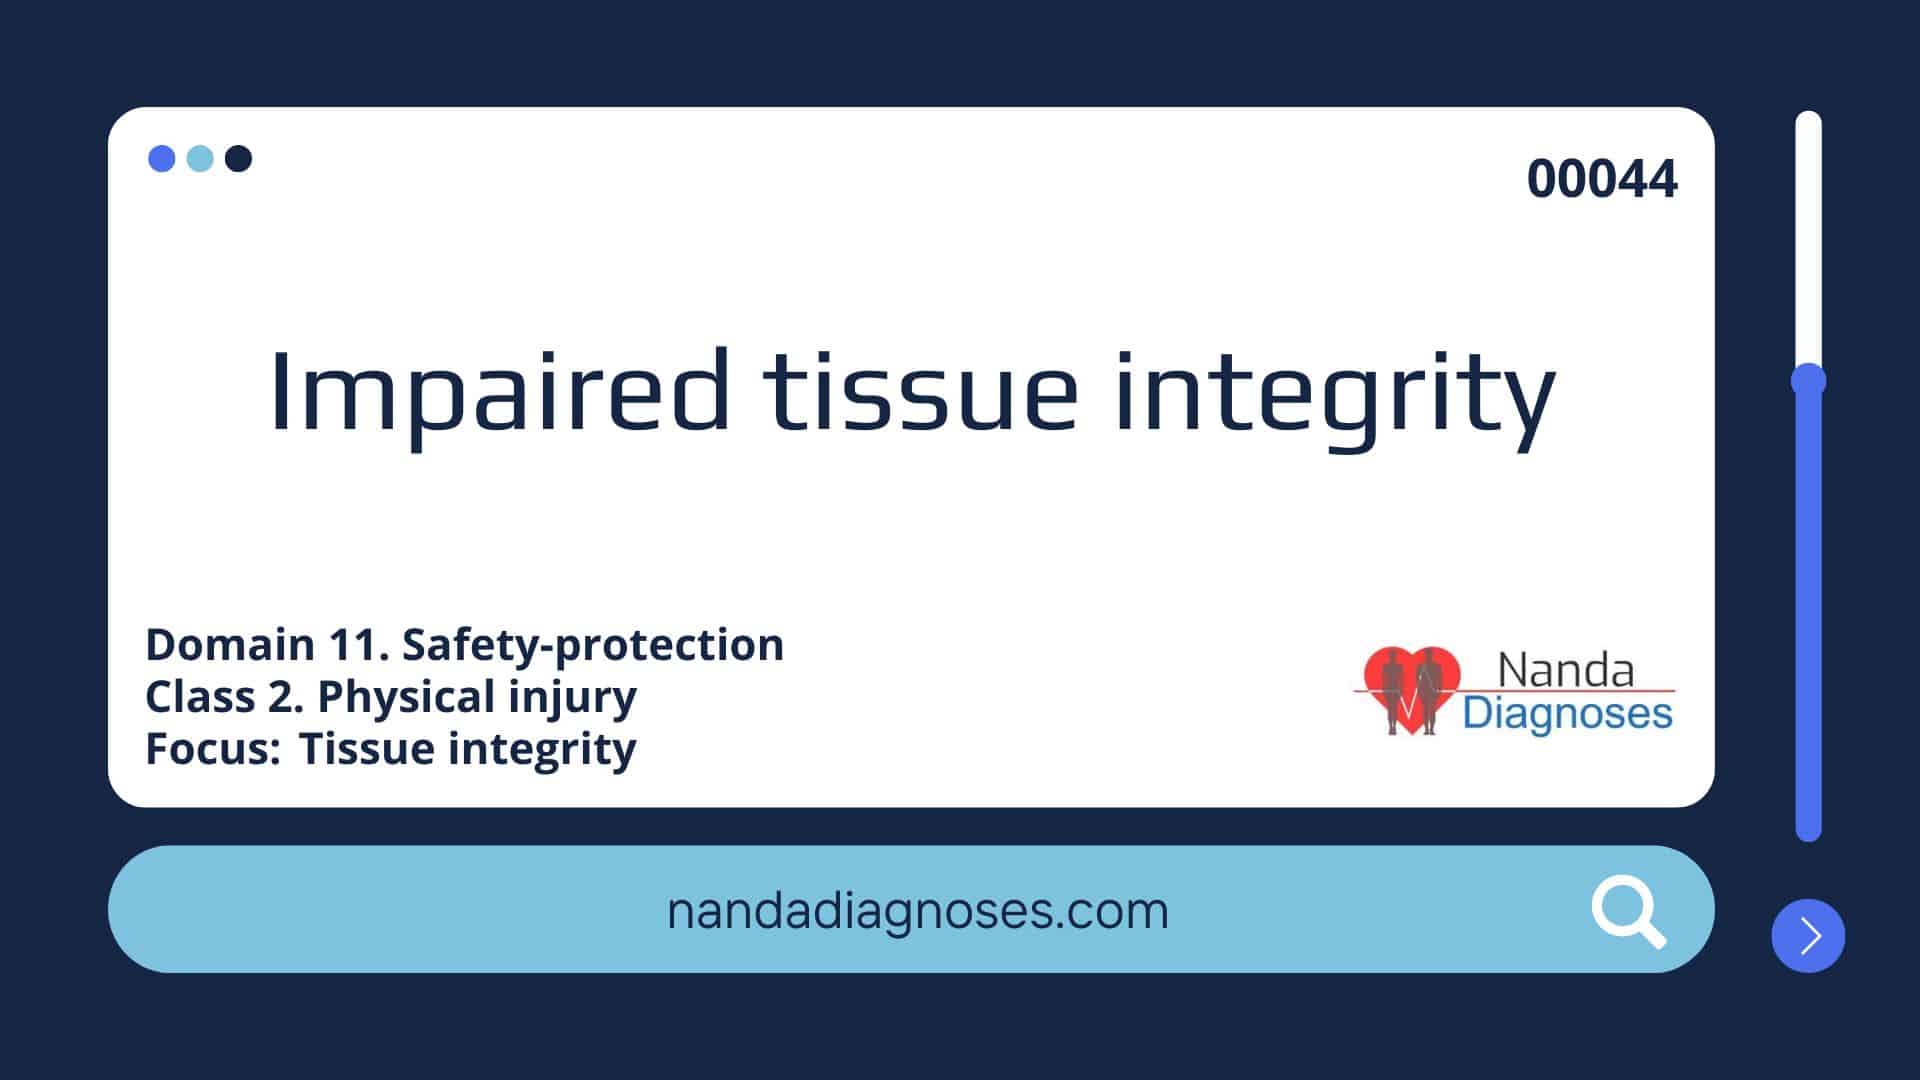 Impaired tissue integrity